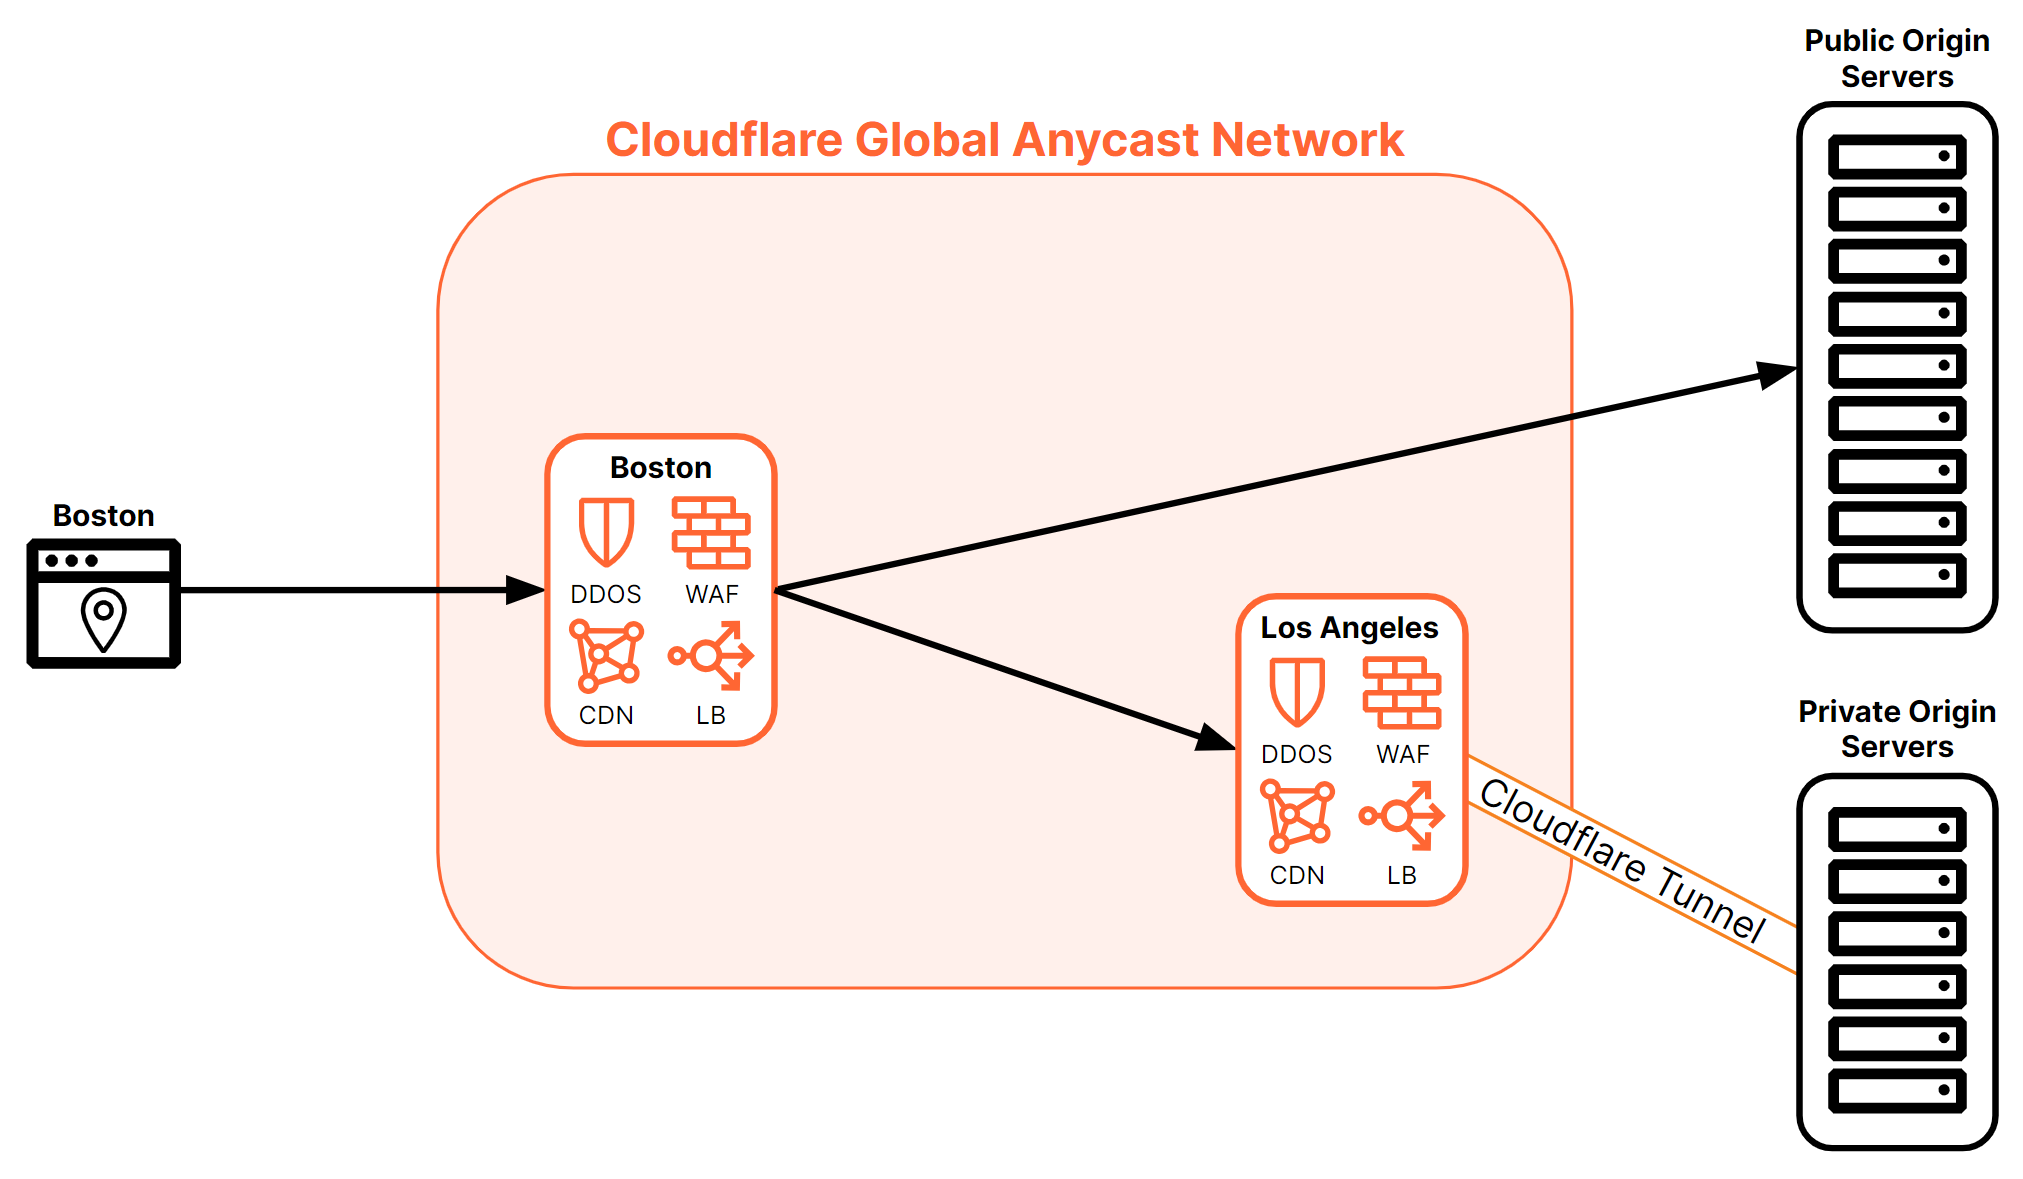 Requests take different paths depending on whether the origin is public or connected over Cloudflare Tunnel